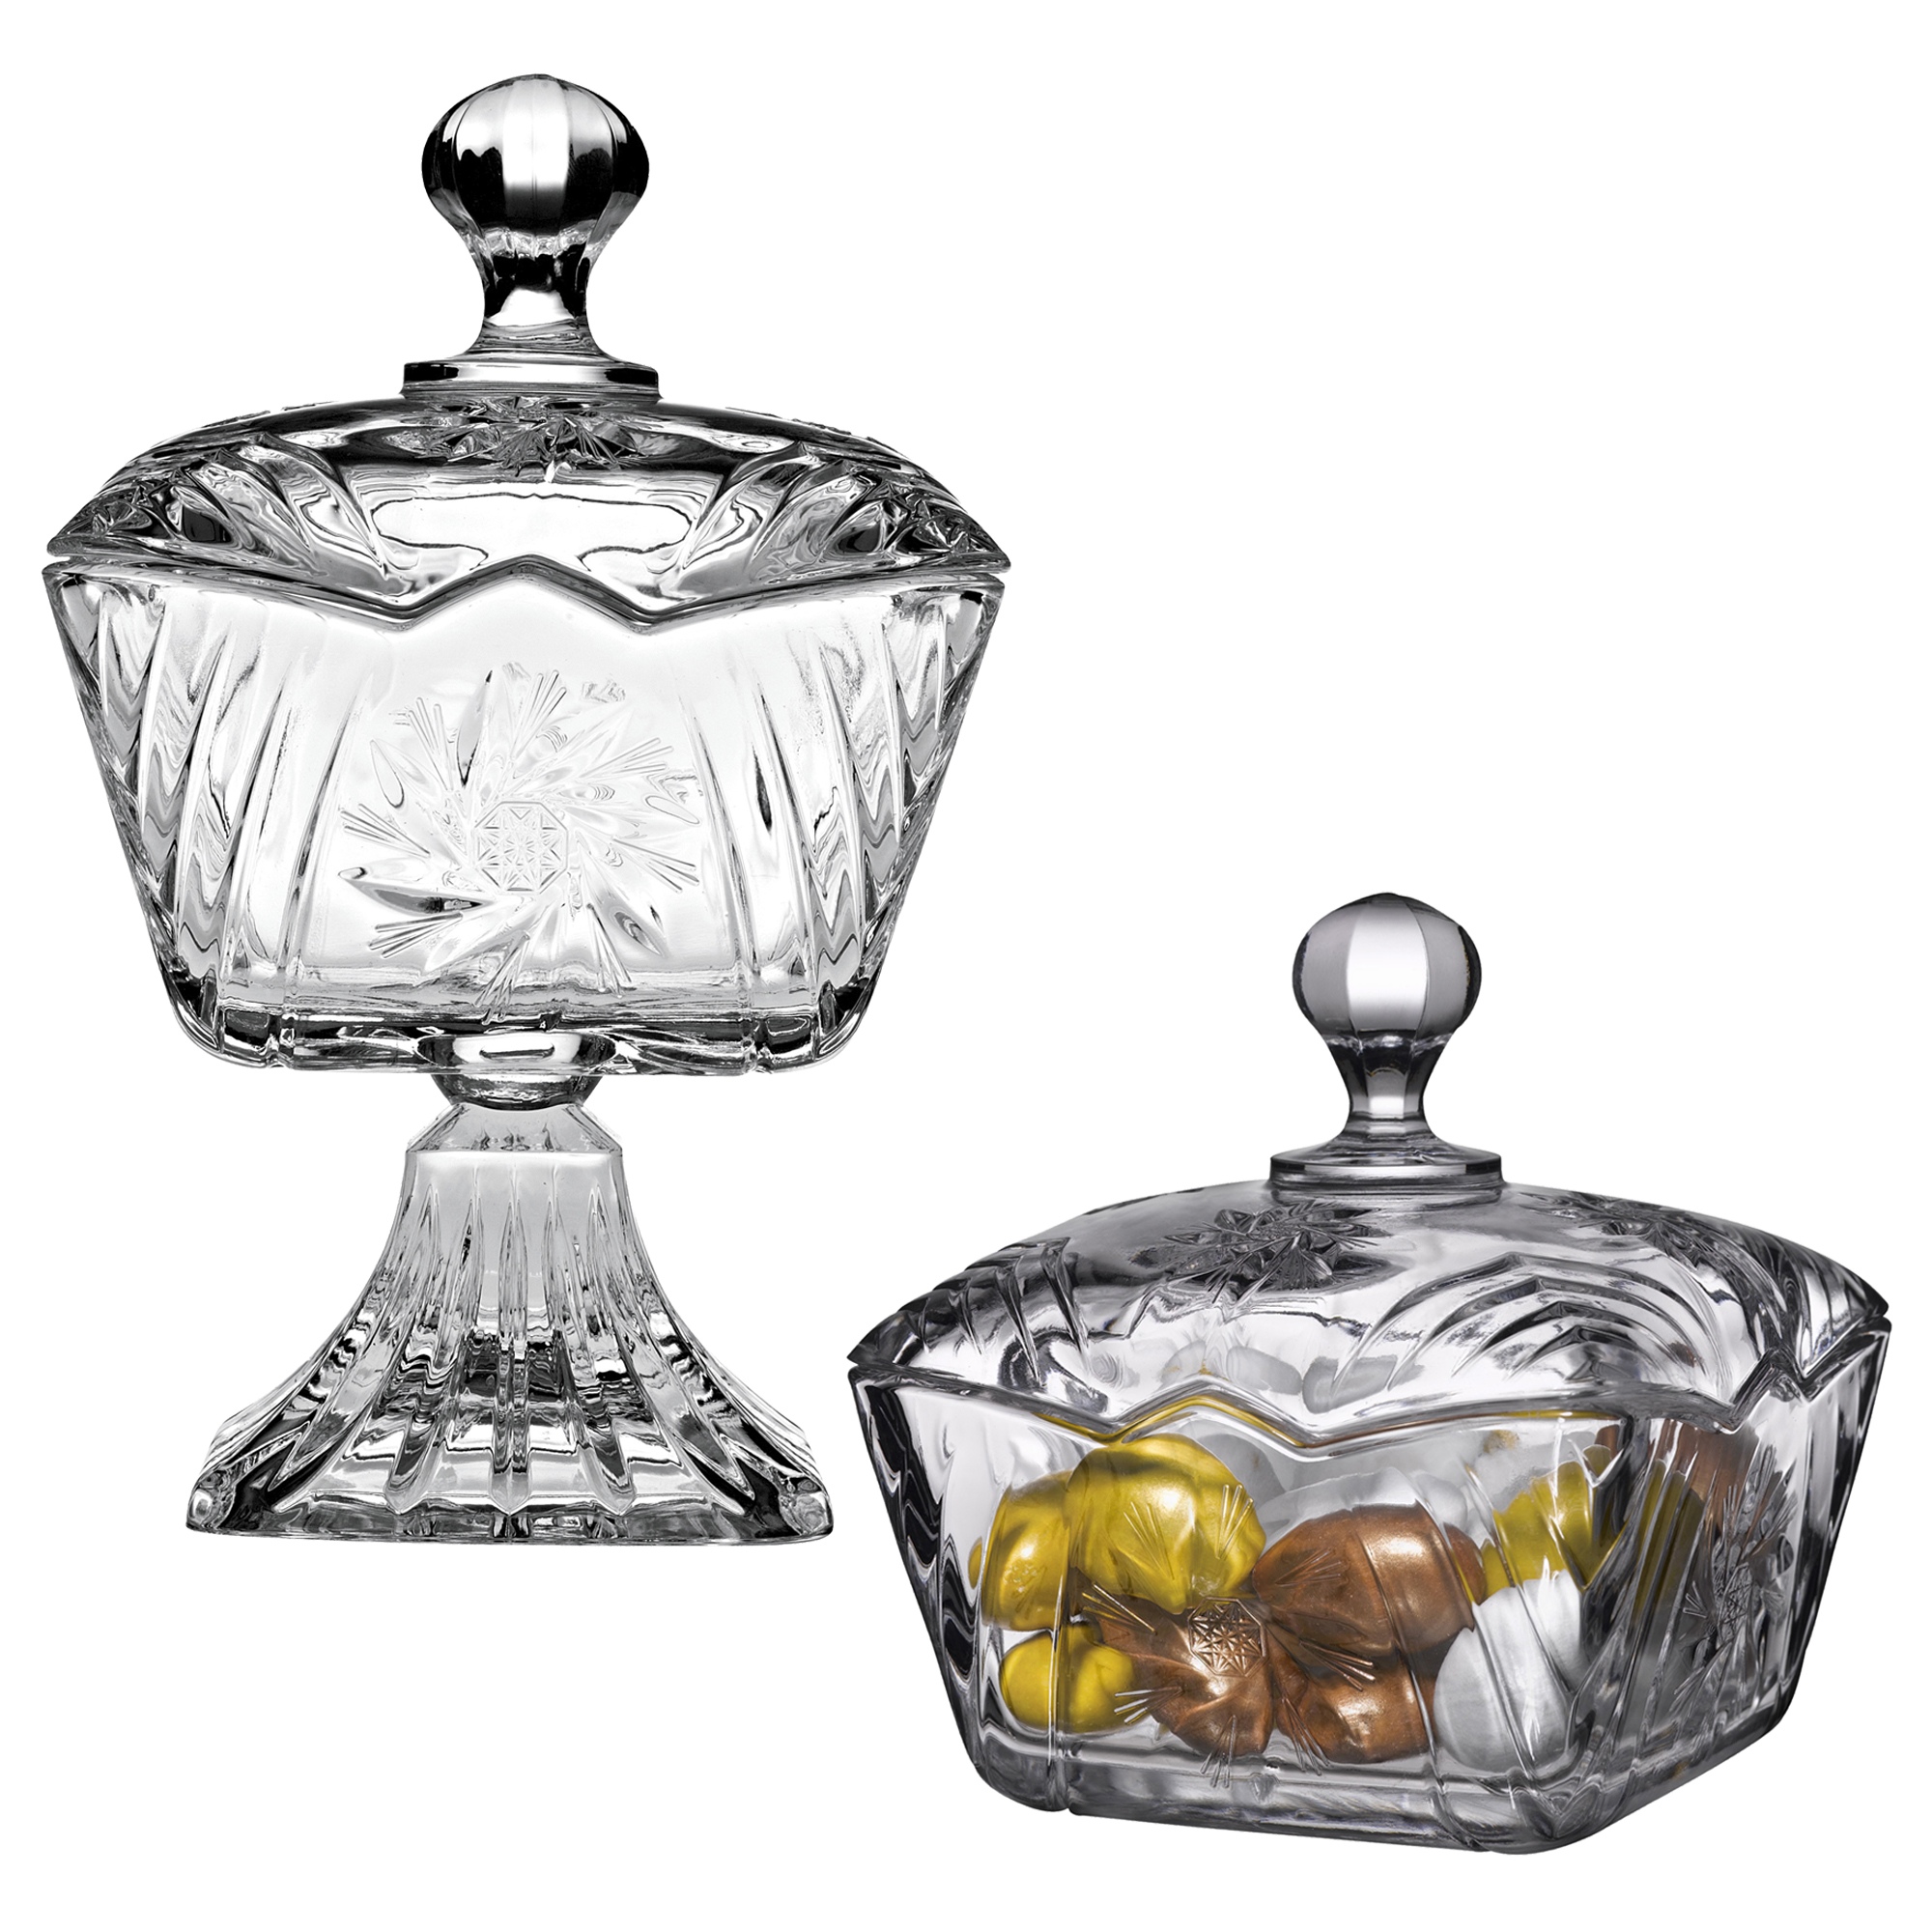 Crystalline Sugar Candy Bowl Sweets Chocolate Gift Serving Dish Without Foot